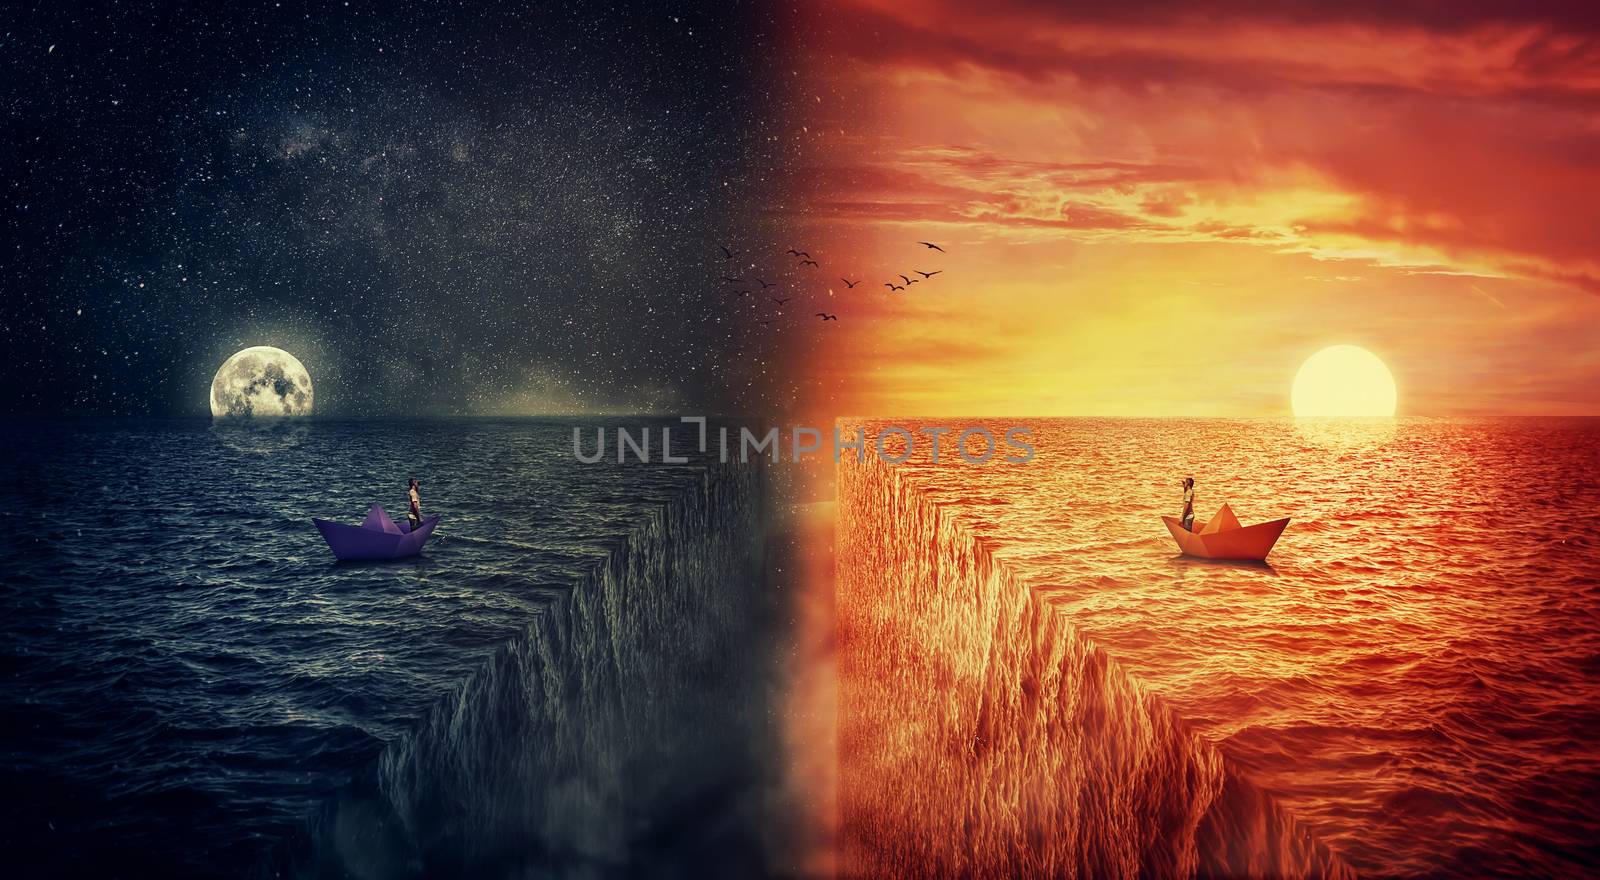 Conceptual view of two worlds collide, as a lost man, in a paper boat, sailing in the middle of the ocean try to find himself in a another world, alternate reality. Parallel universe, multiverse fiction theory. Adventure and journey concept.